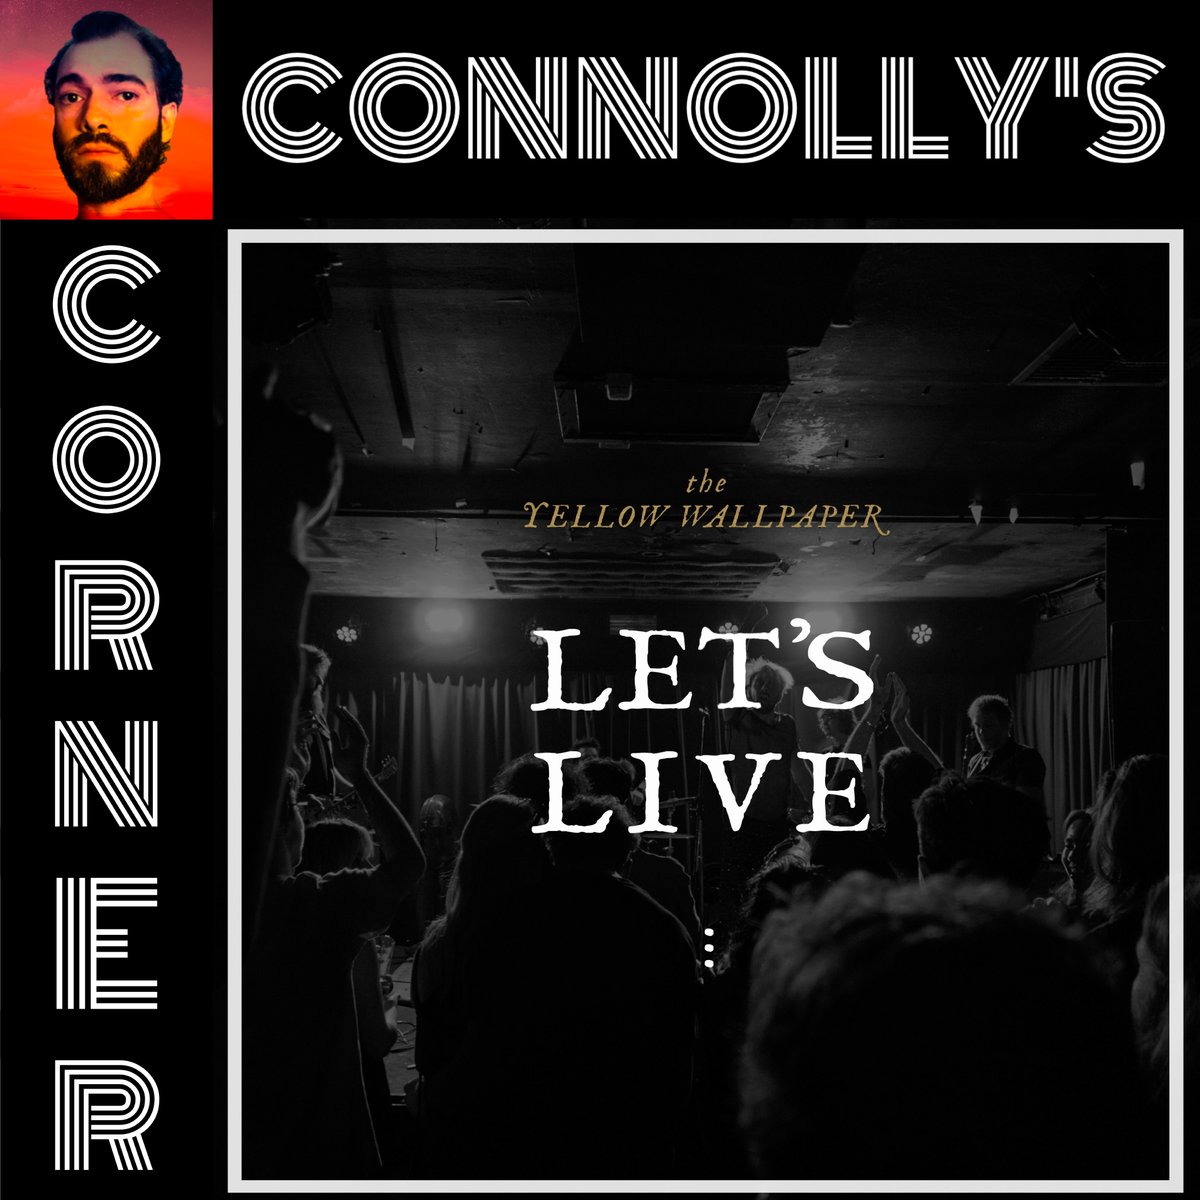 𝗖𝗼𝗻𝗻𝗼𝗹𝗹𝘆’𝘀 𝗖𝗼𝗿𝗻𝗲𝗿: Let's Live by @YellowWallMusic Reviews by @ConnollyTunes Charles celebrates life… 👇👇👇 newartistspotlight.org/post/this-week… #Adelaide #alternative #rock #anthem #epic #falsetto #strings @suedeHQ @radiohead @whiteliesmusic @Elbow #IWantMyNAS #StopPayola